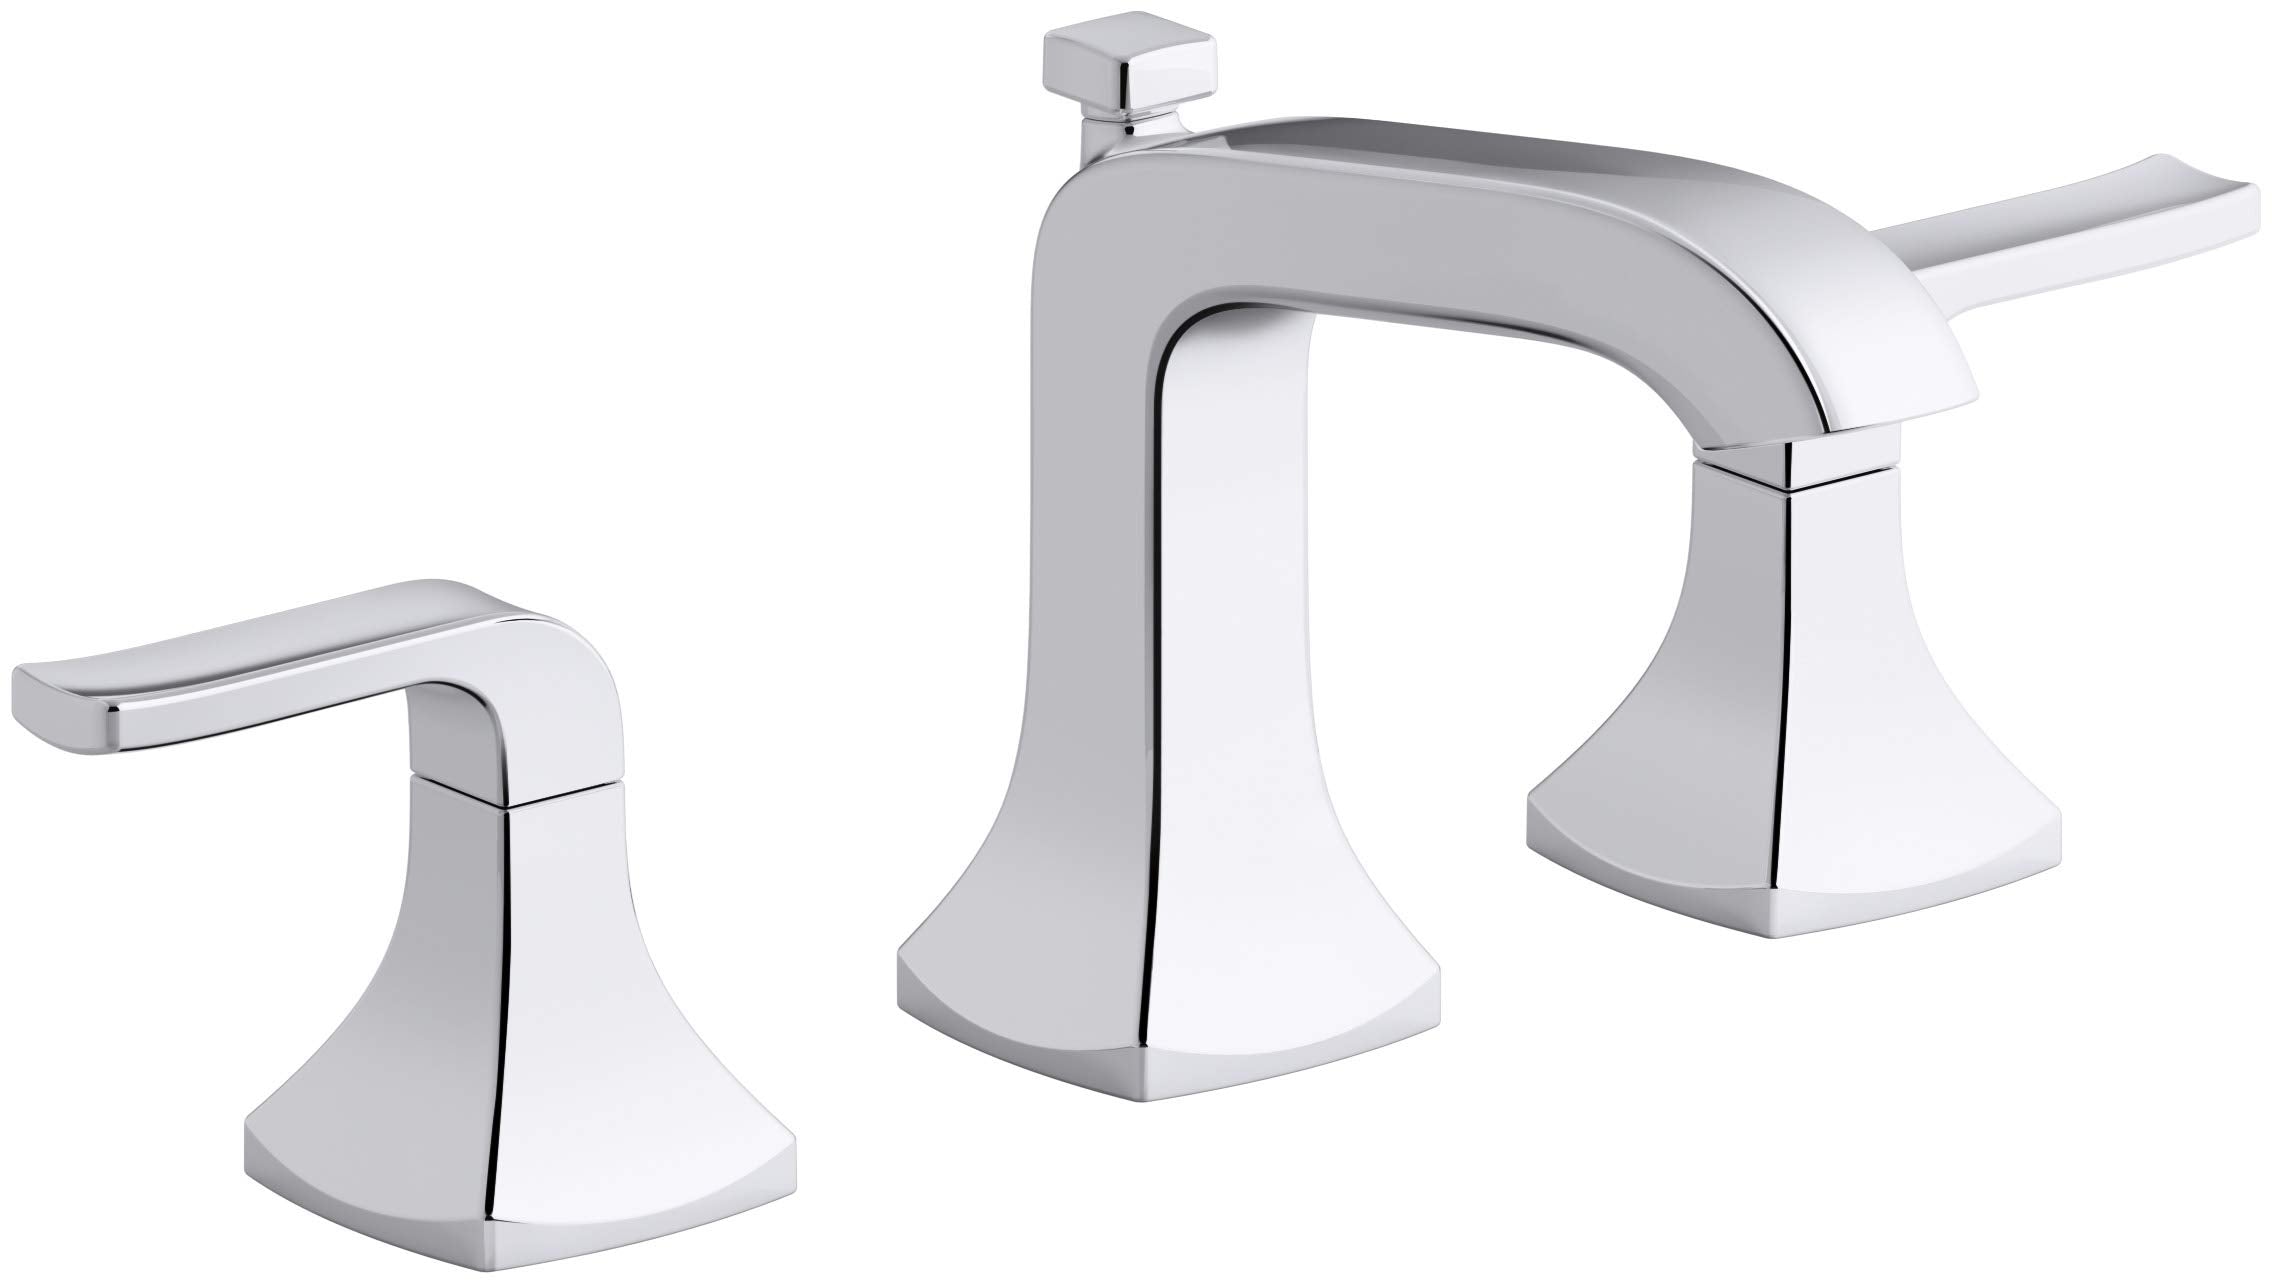 KOHLER Rubicon 8 in. Widespread 2-Handle Bathroom Faucet in Polished Chrome (7653328421102)